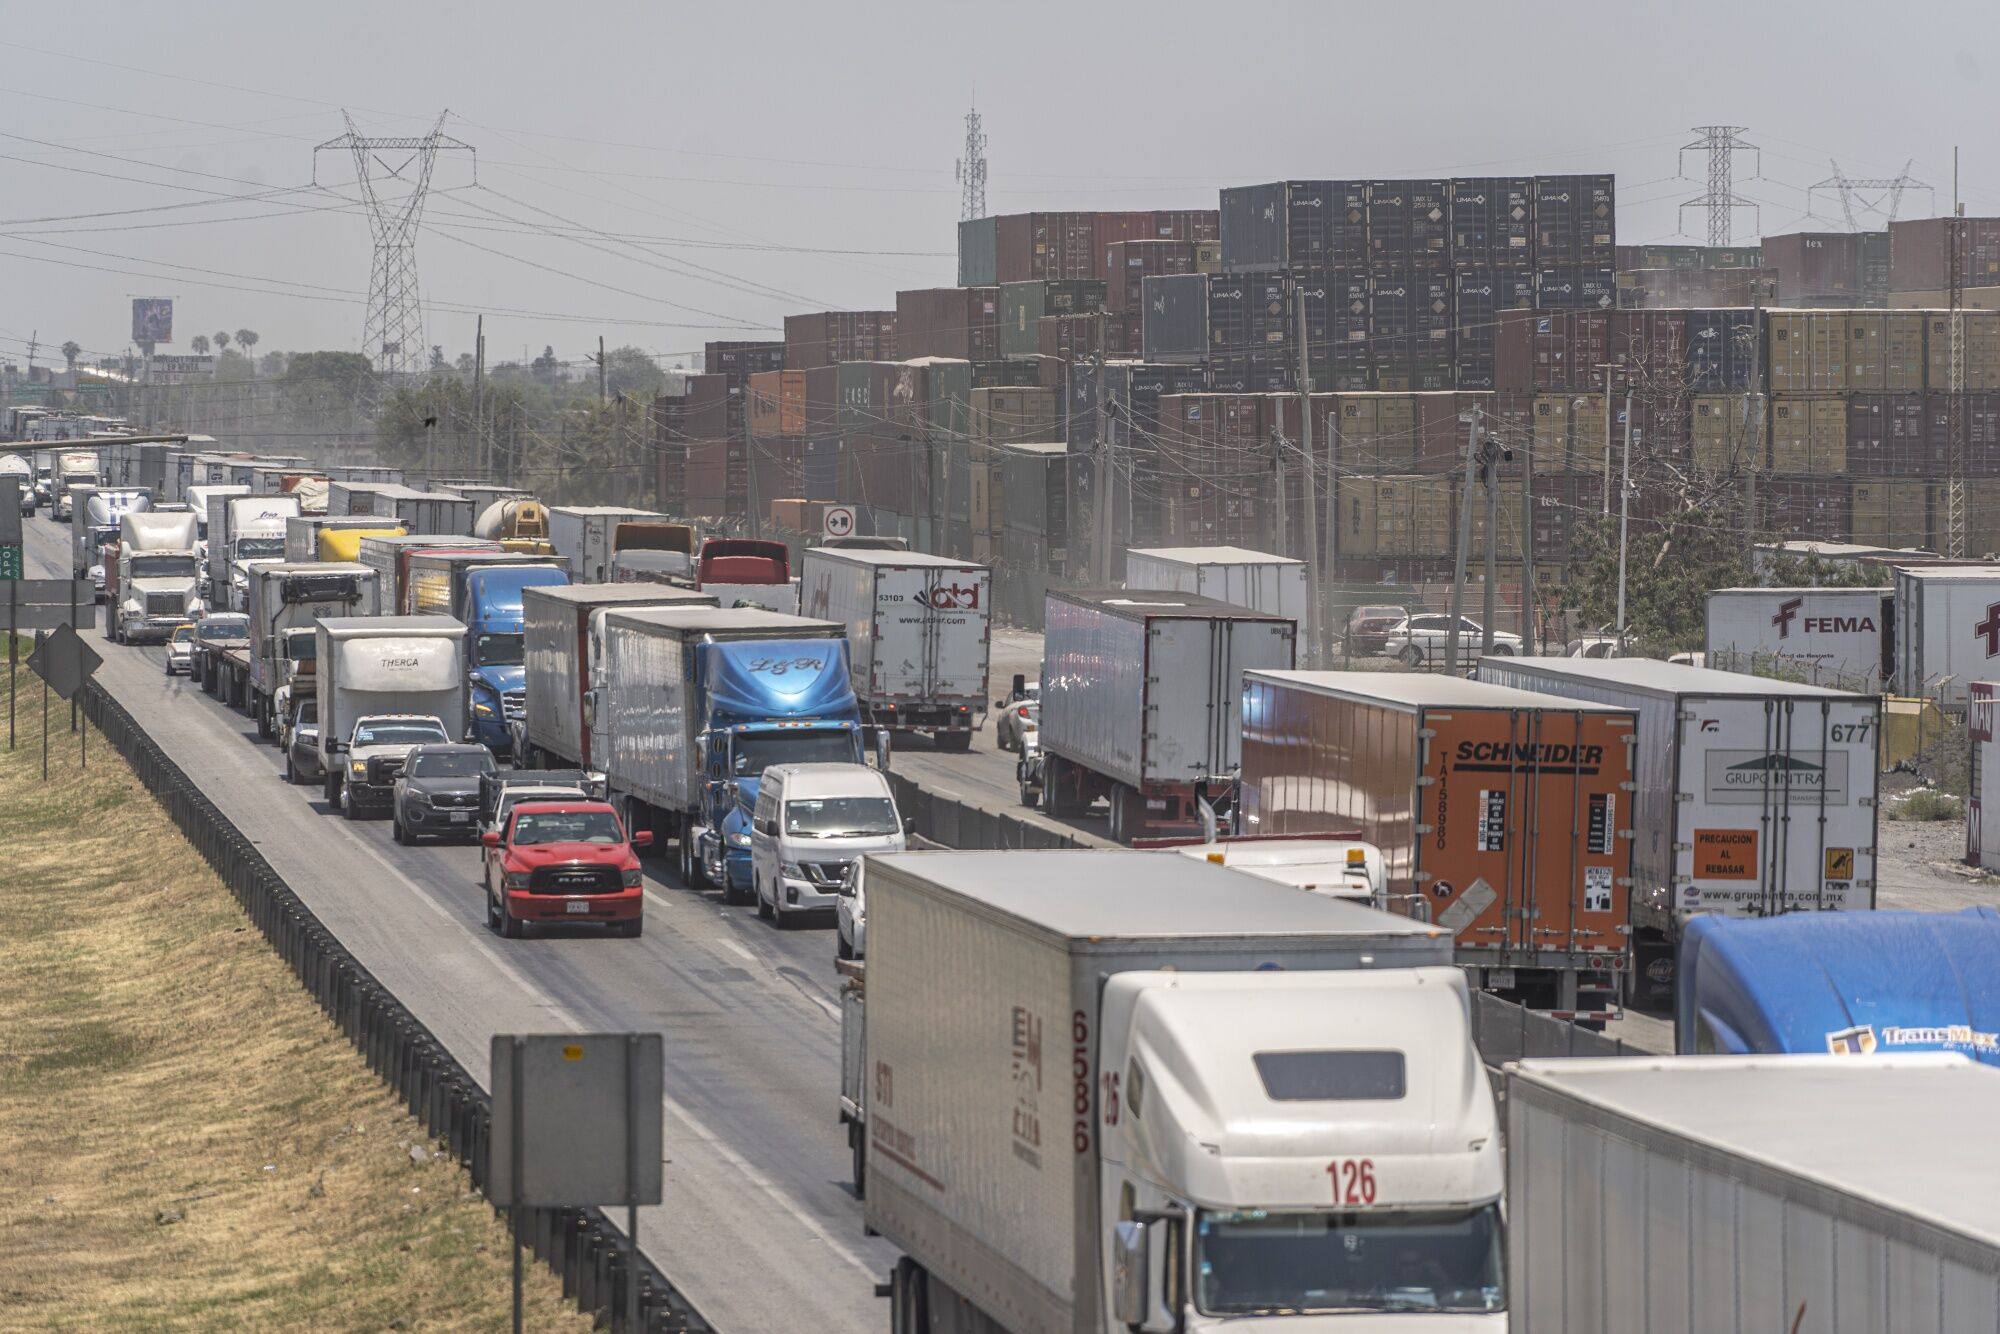 Heavy traffic is seen near a container depot in Monterrey, in Nuevo Leon, Mexico, on June 20. As US-China tensions rewire global trade, Mexico has overtaken China as the biggest supplier of goods to the giant customer next door. Photo: Bloomberg